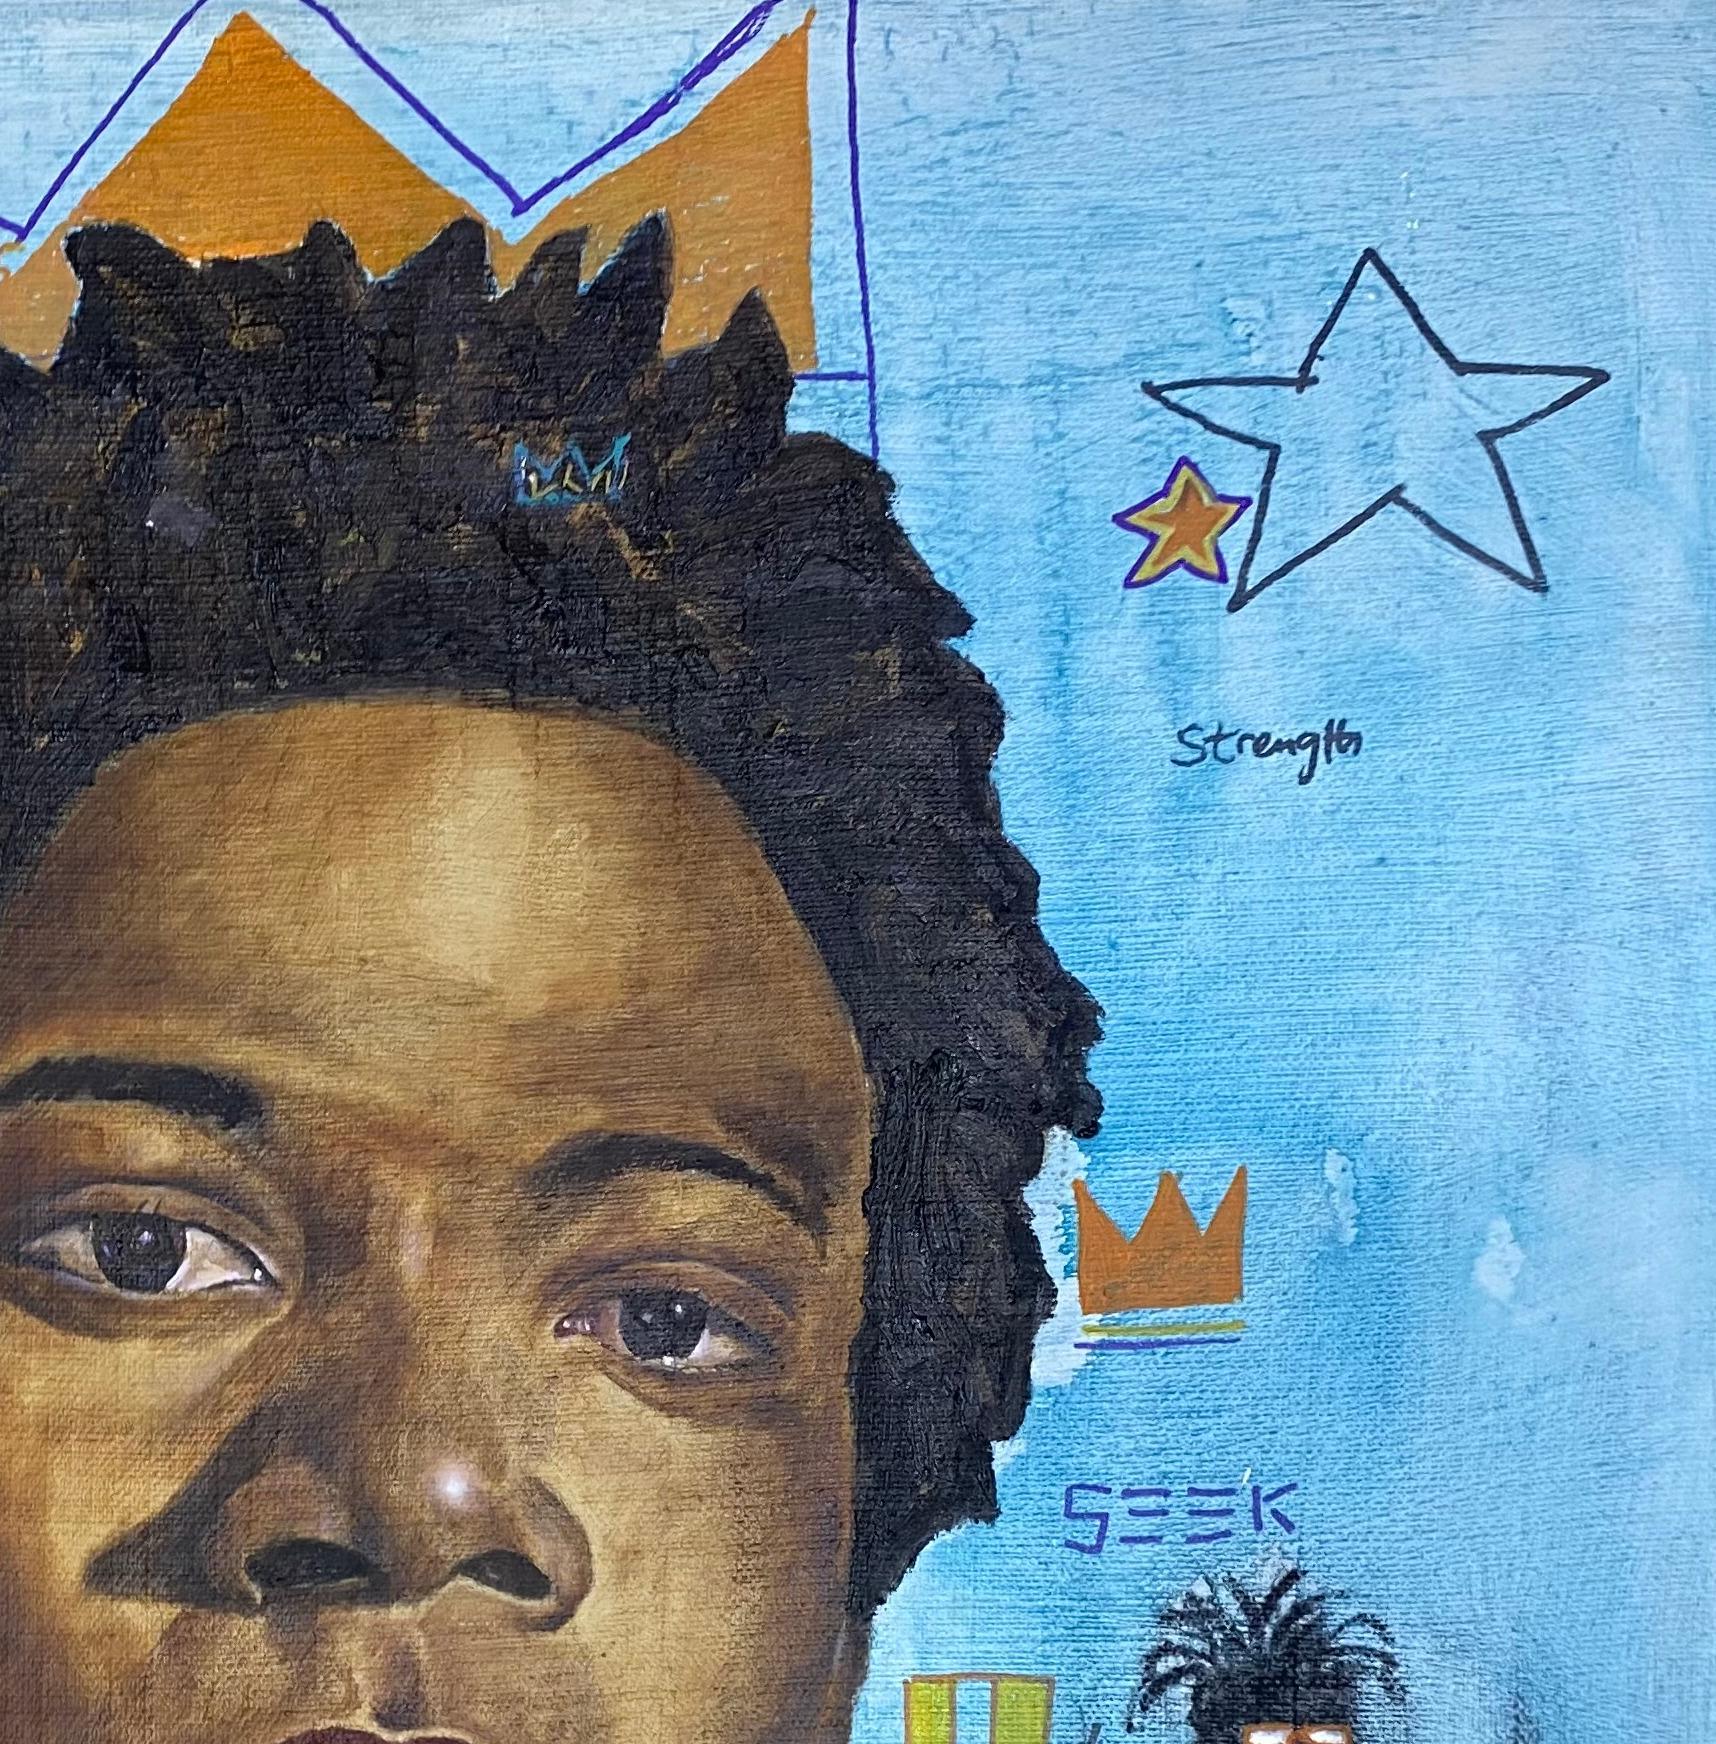 Jean-Michel Basquiat, a prodigious talent who tragically left this world too soon, was a force of nature in the art world of the 1980s. His works were characterized by a unique fusion of street art, graffiti, and neo-expressionism, blending social